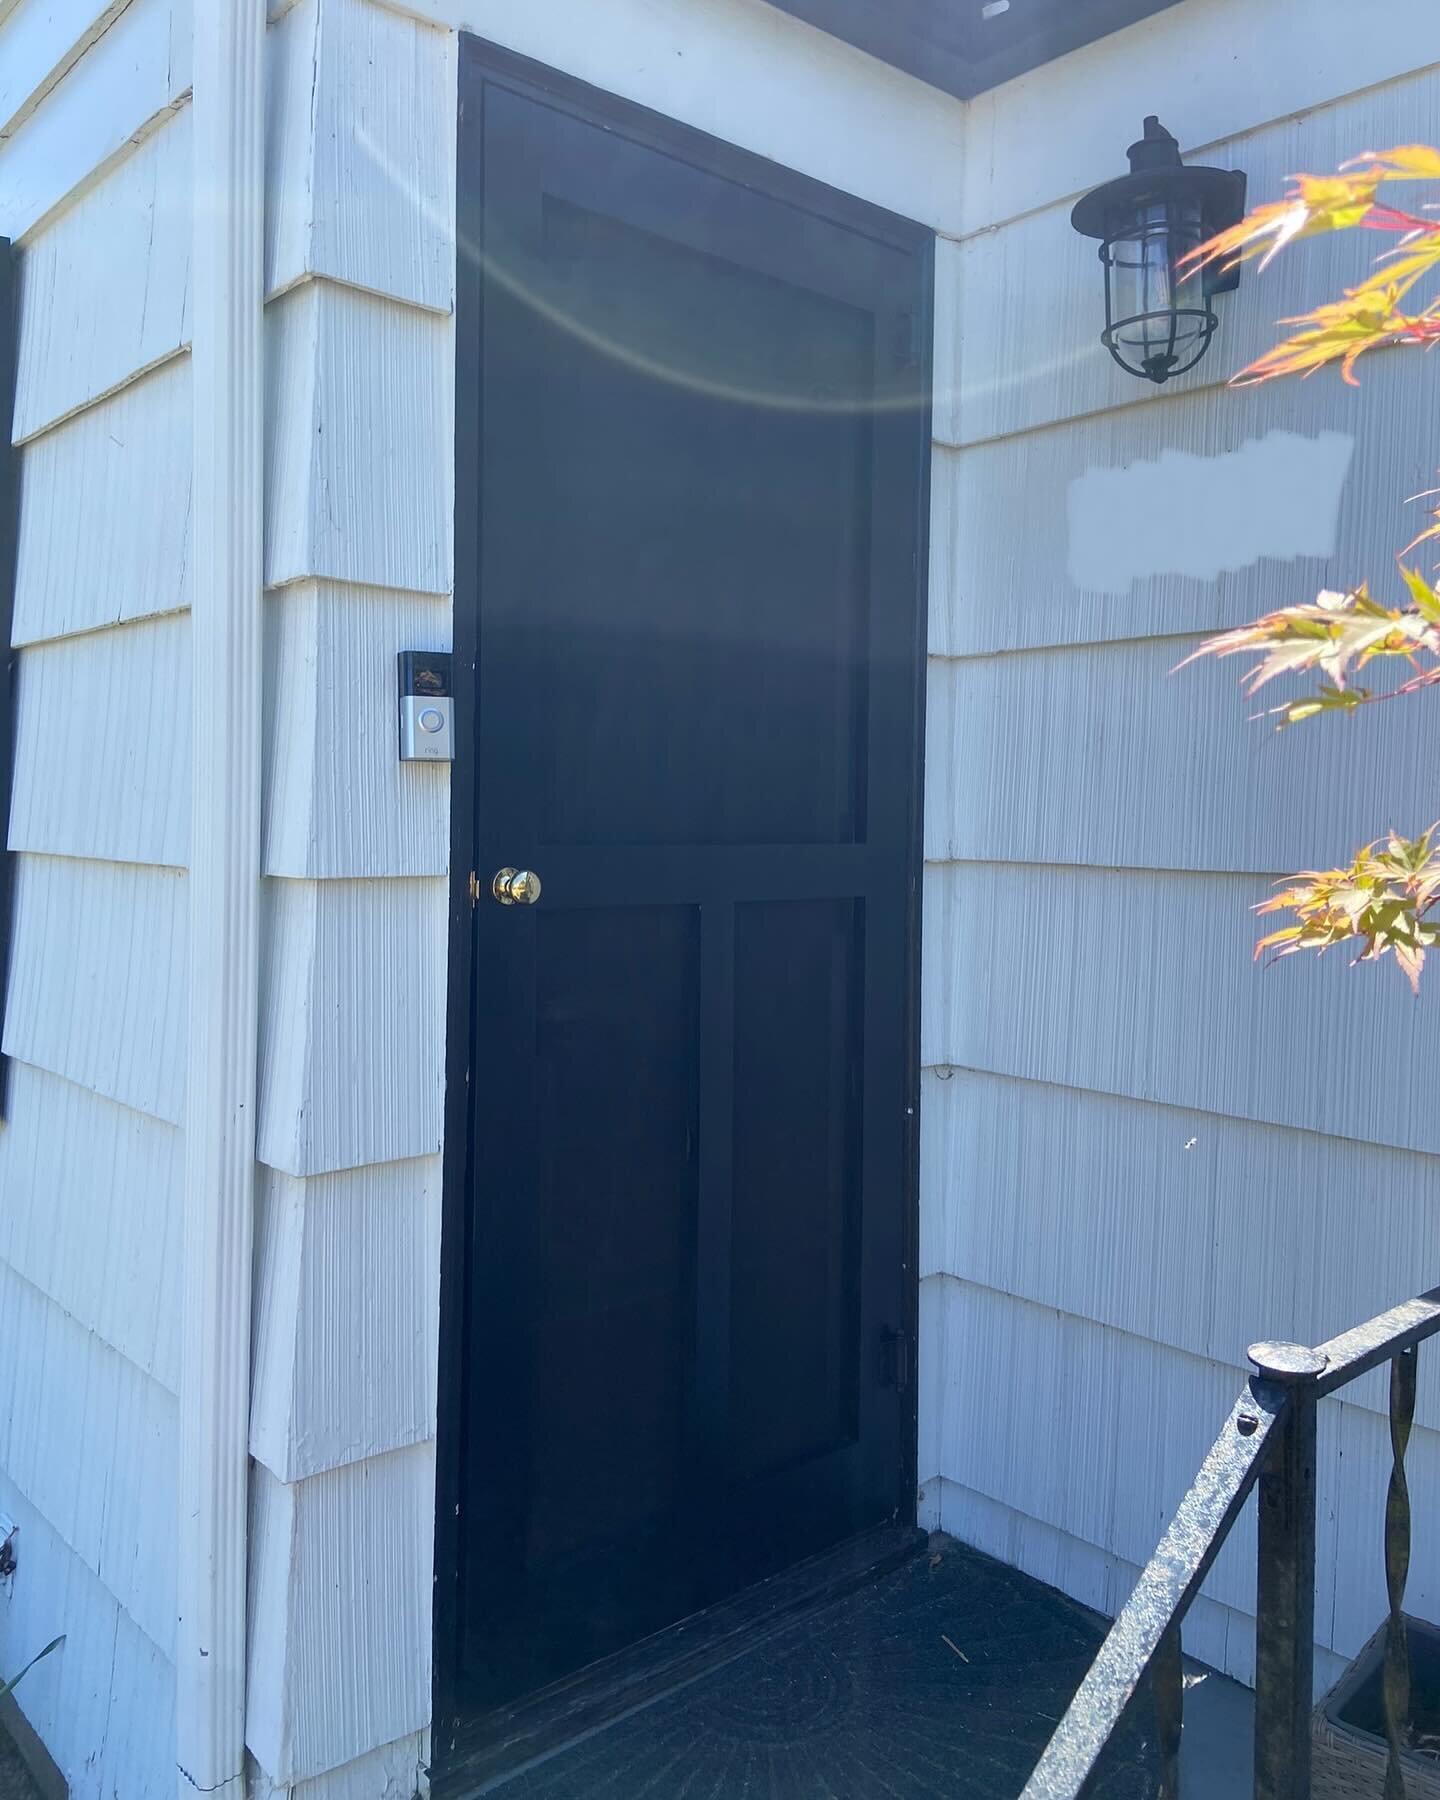 Adding a touch of charm to this sweet Wedgewood home with a bespoke wooden black screen door featuring a pop of gold hardware! 🖤✨ No more worrying about Pepper, the pup, getting out to chase those bunnies! 🐕 🐰  #darenstyle #seattle #screendoor #sc